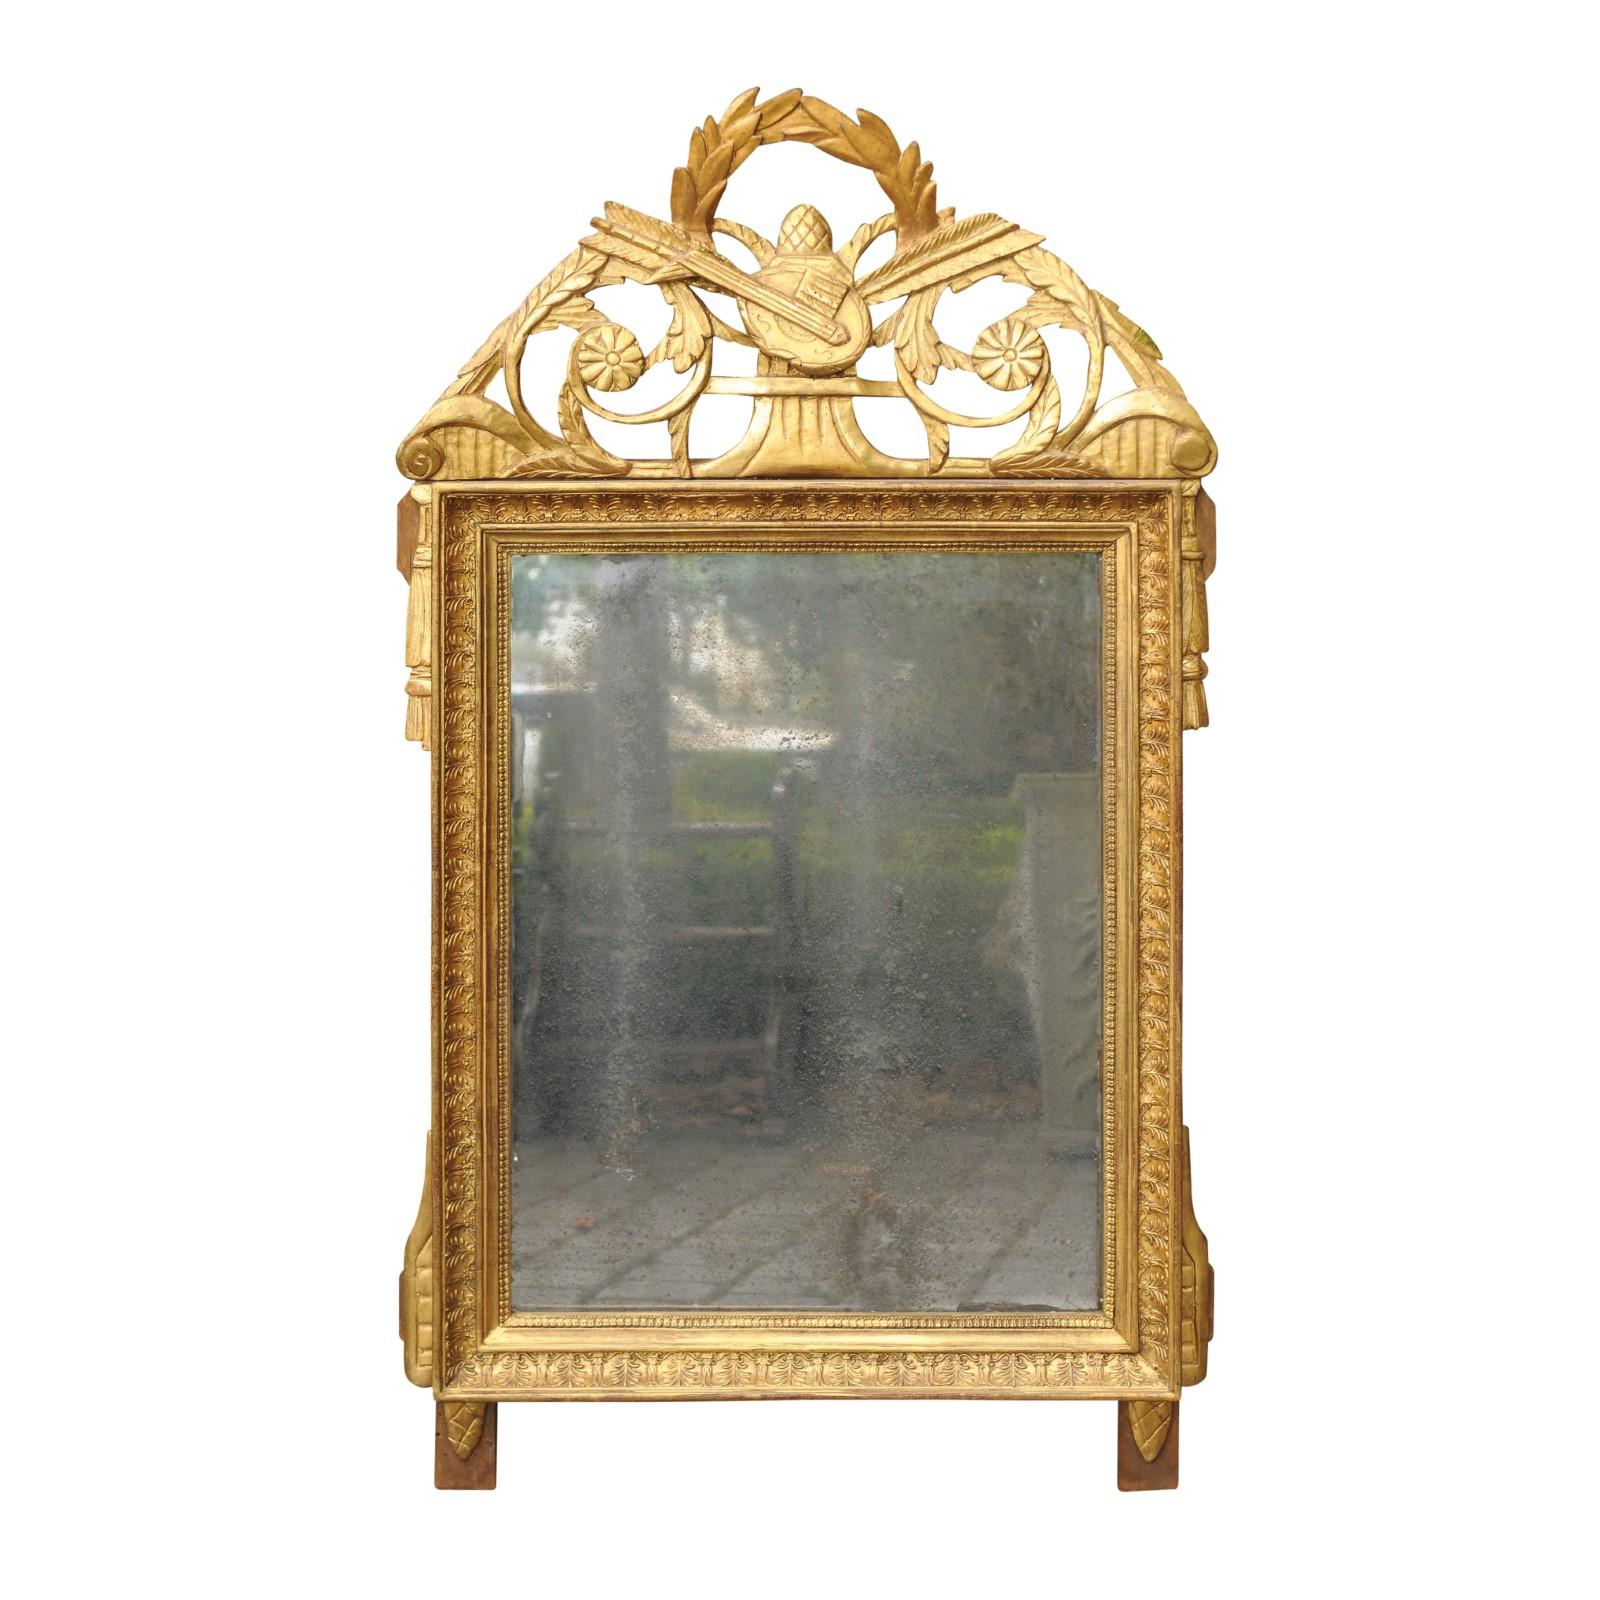 French Louis XVI Late 18th Century Giltwood Mirror with Liberal Arts Motifs For Sale